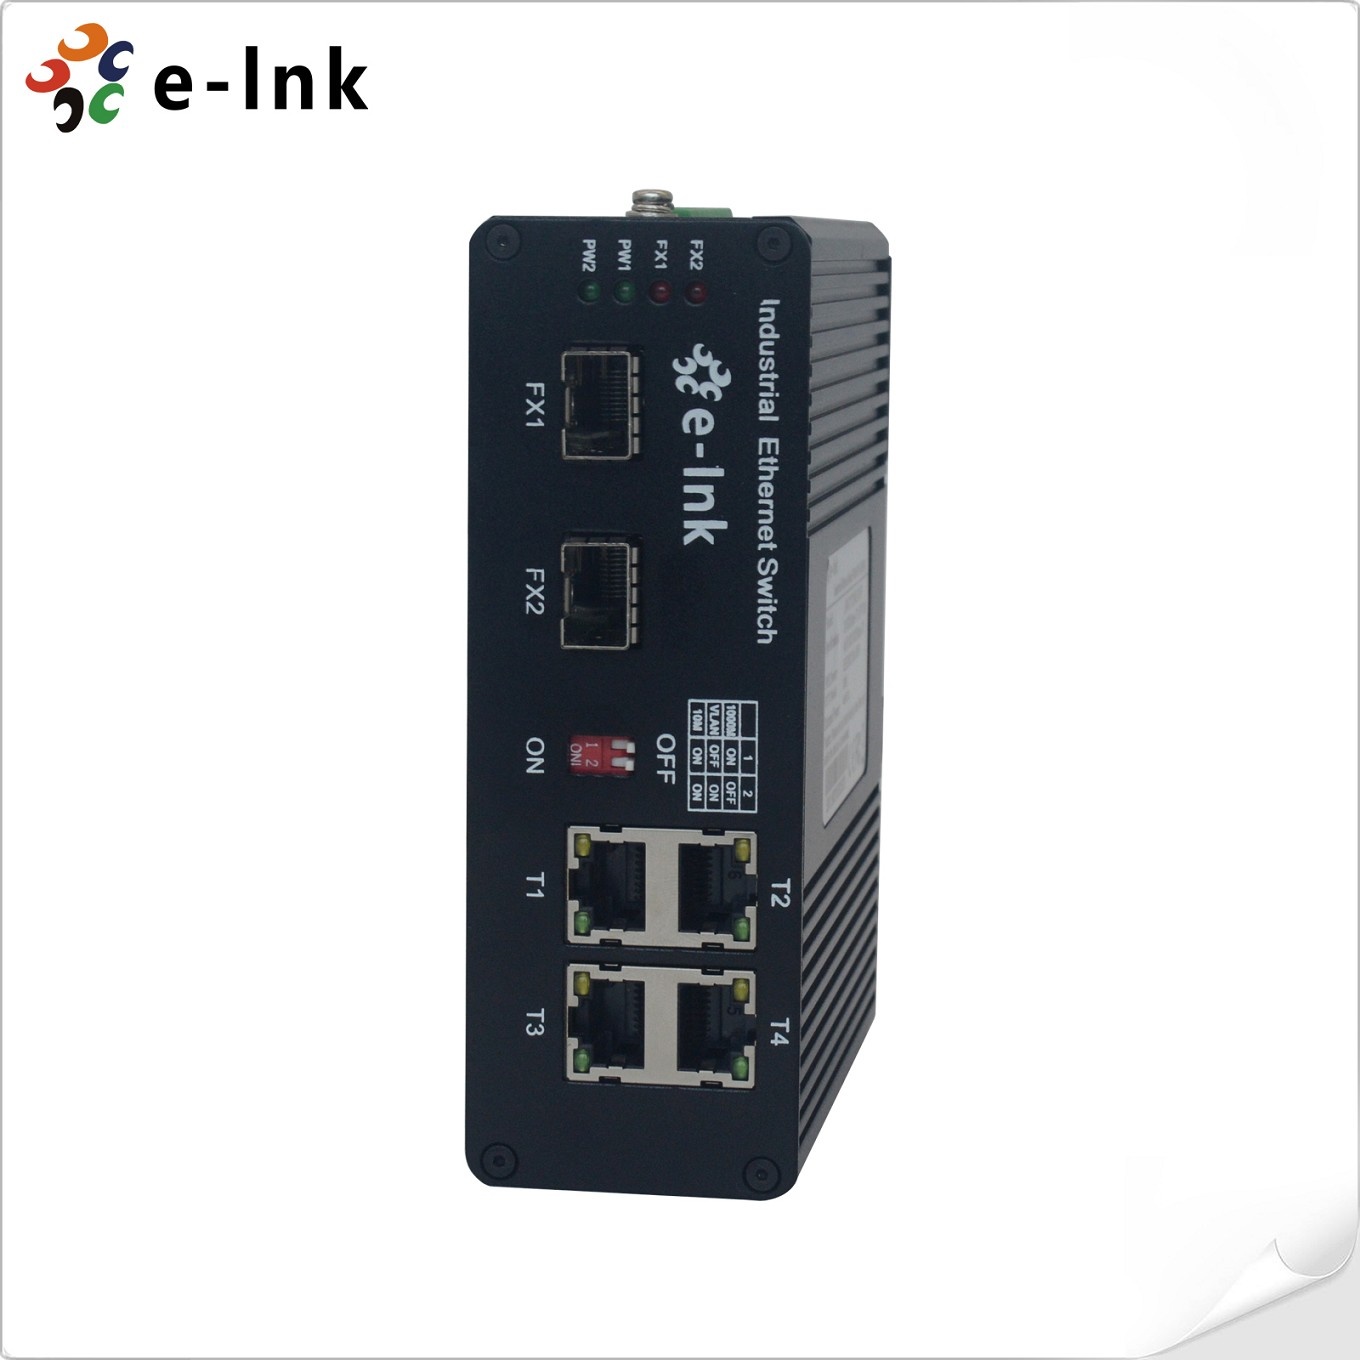 4 RJ45 ports + 2 SFP ports 10/100/1000Mbps 250 meter Industrial PoE Switch